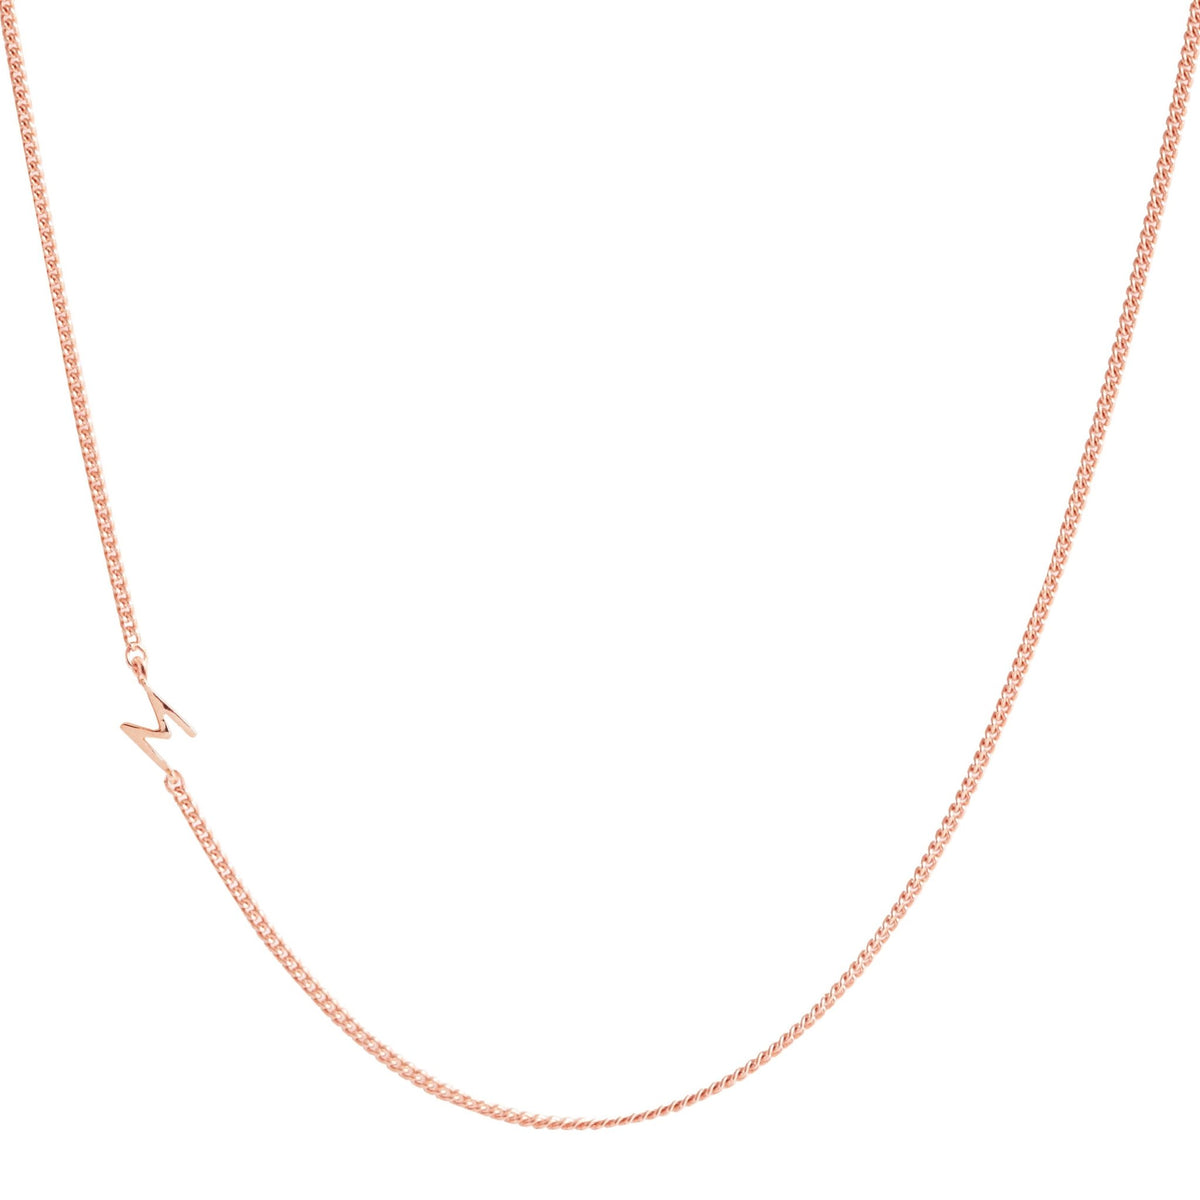 NOTABLE OFFSET INITIAL NECKLACE - M - GOLD, ROSE GOLD, OR SILVER - SO PRETTY CARA COTTER